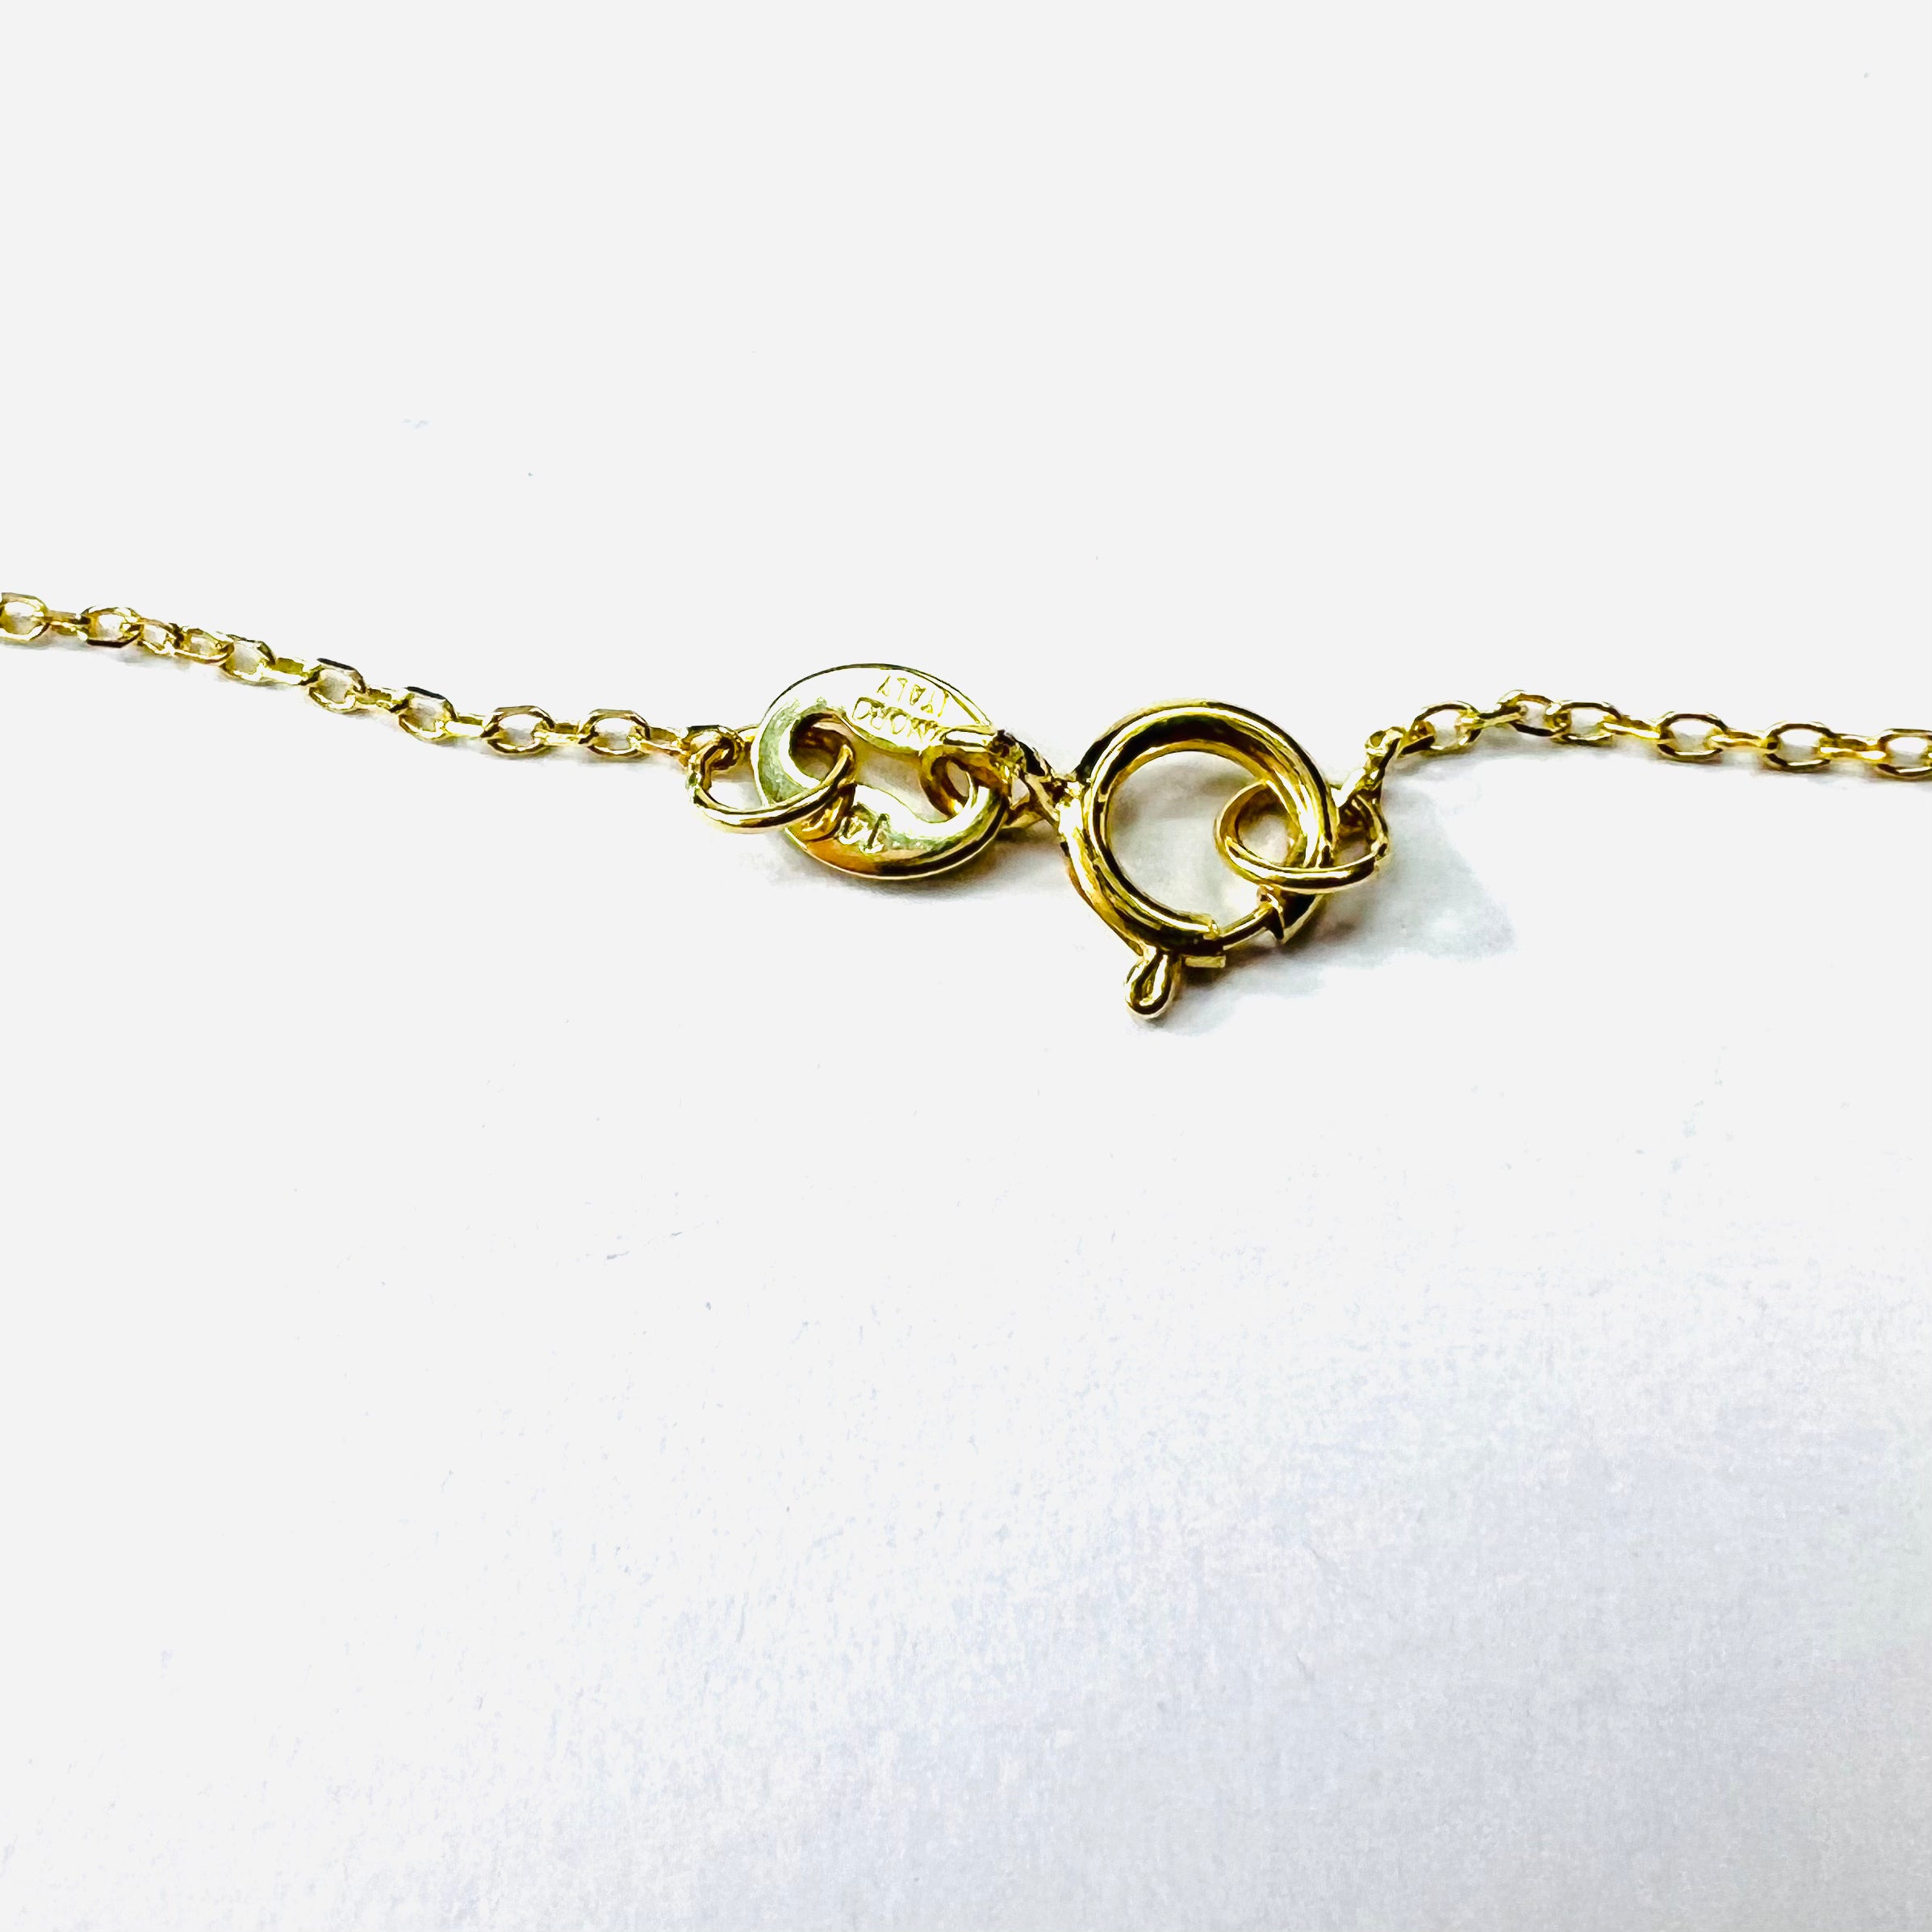 Oval Sapphire 18" 1.02g 14K Yellow Gold Cable Chain Necklace